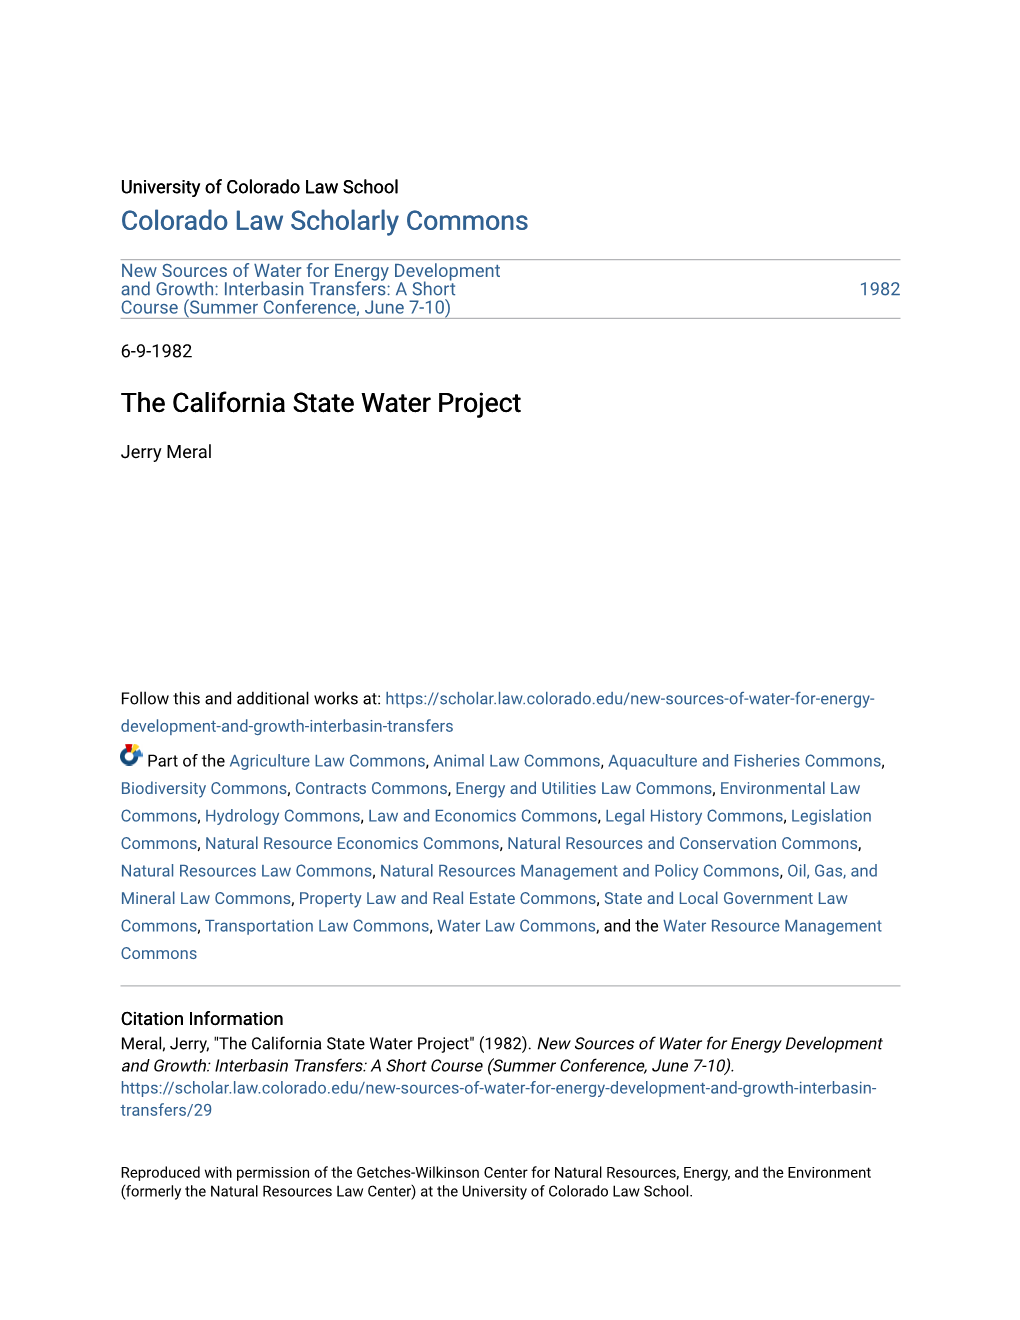 The California State Water Project